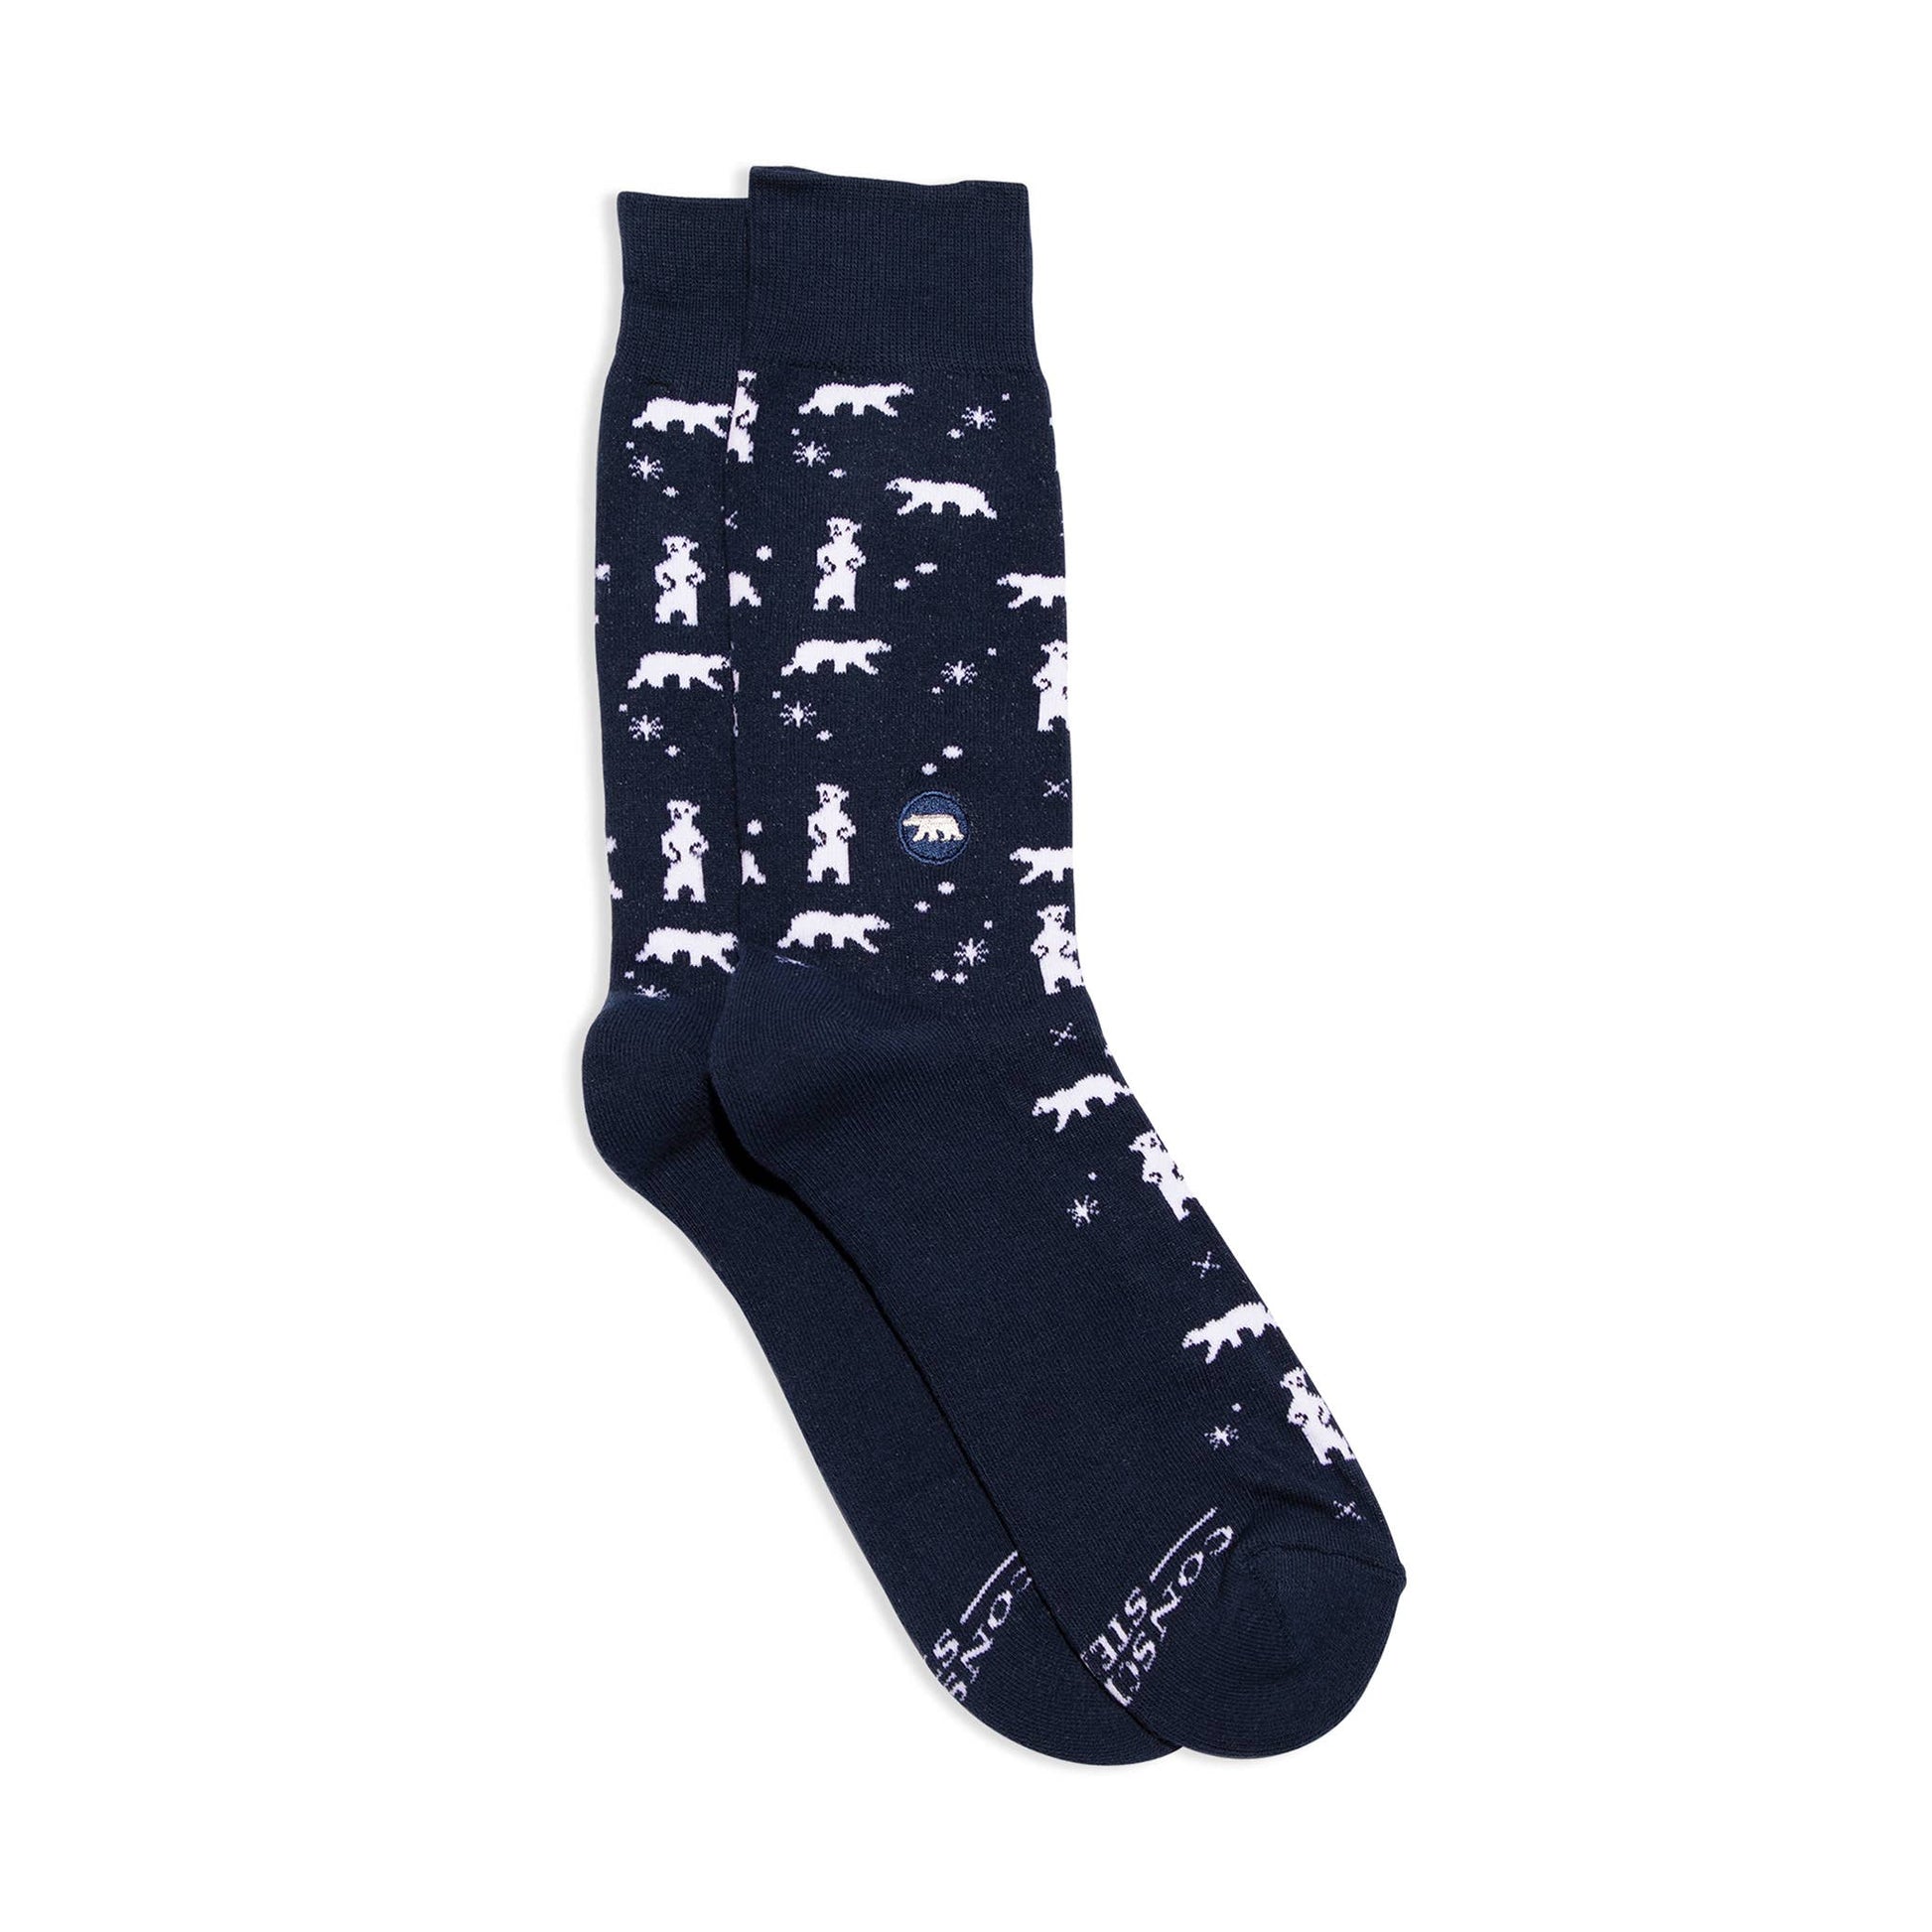 Socks that Protect Polar Bears: Small Accessories Conscious Step   